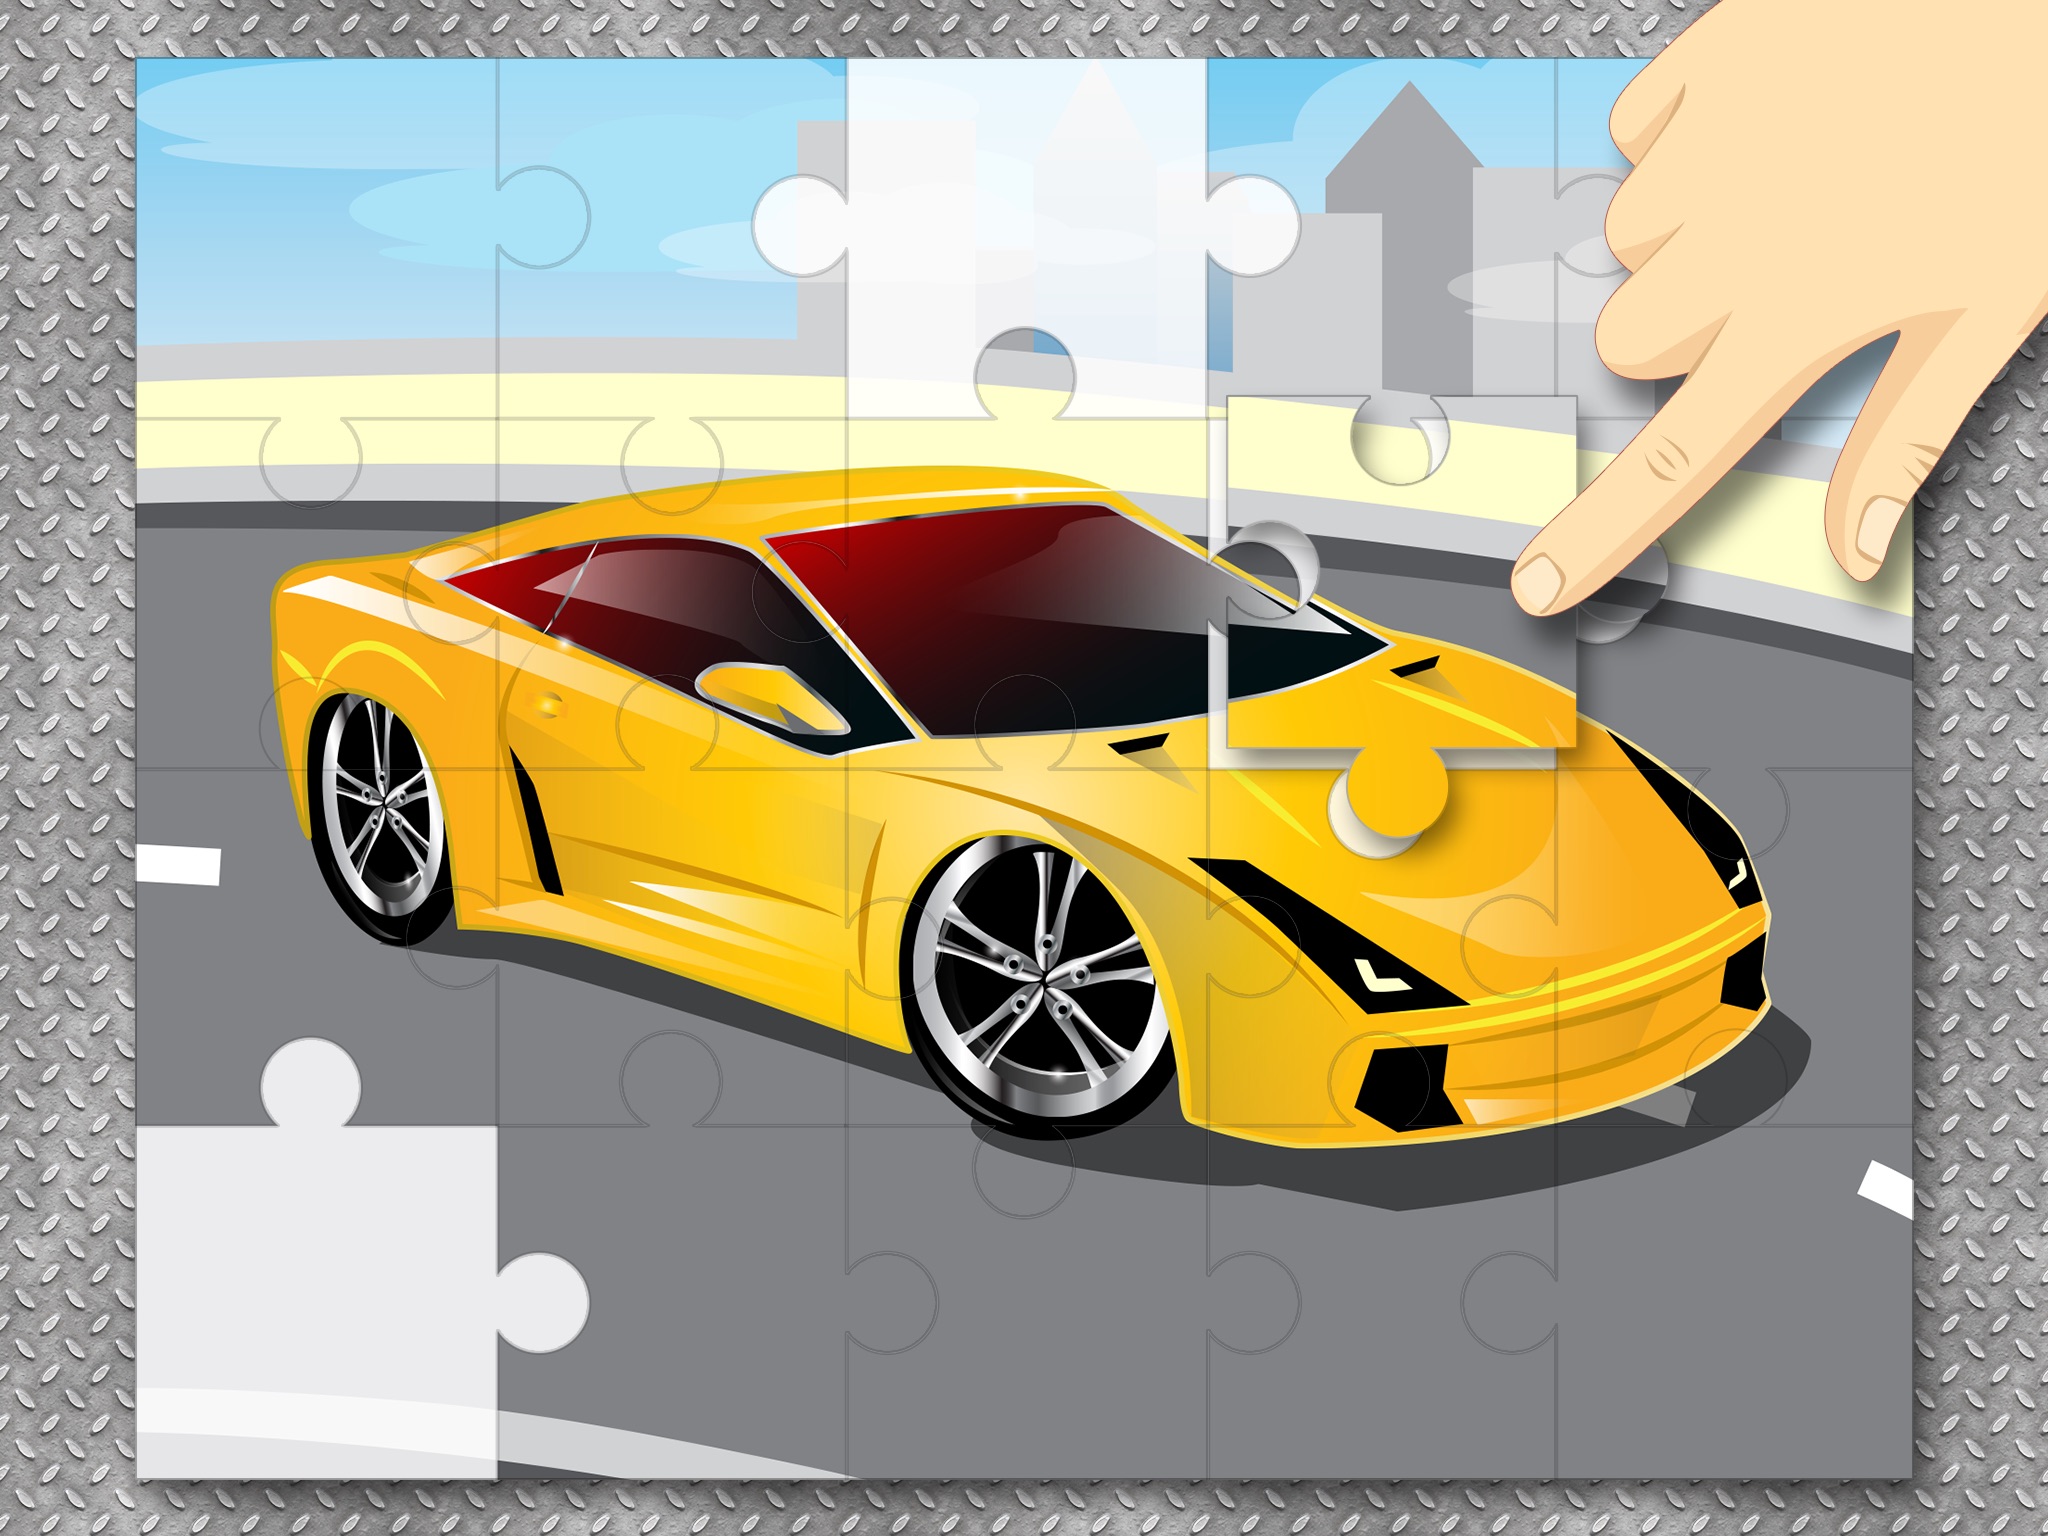 Sports Cars & Monster Trucks Jigsaw Puzzles : free logic game for toddlers, preschool kids and little boys screenshot 3